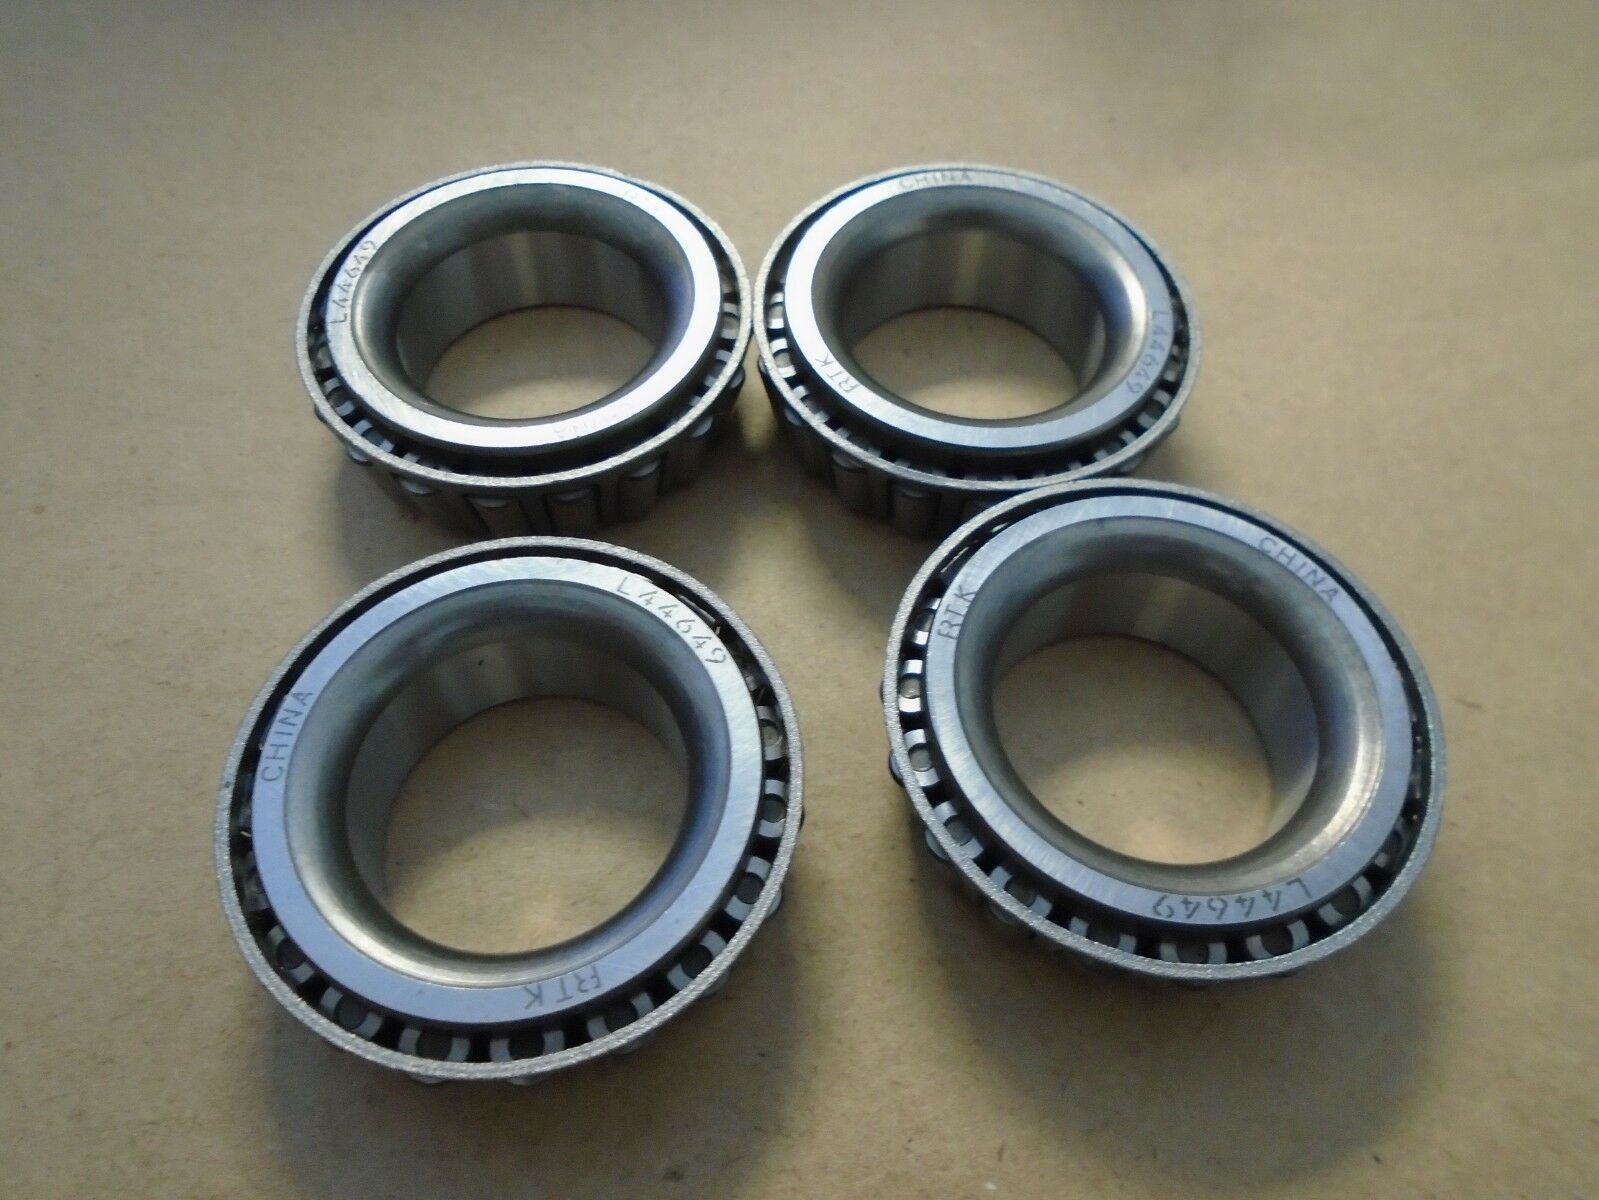 Tapered Roller Bearing 28580/28521 28584/28521 28678/28622B 28680/28622B 28985/28920 28985/28921 29580/29520 29590/29521 29586/29522 29685/29620 LM29748/LM29710 LM29749/LM29711 57410S/LM29710S